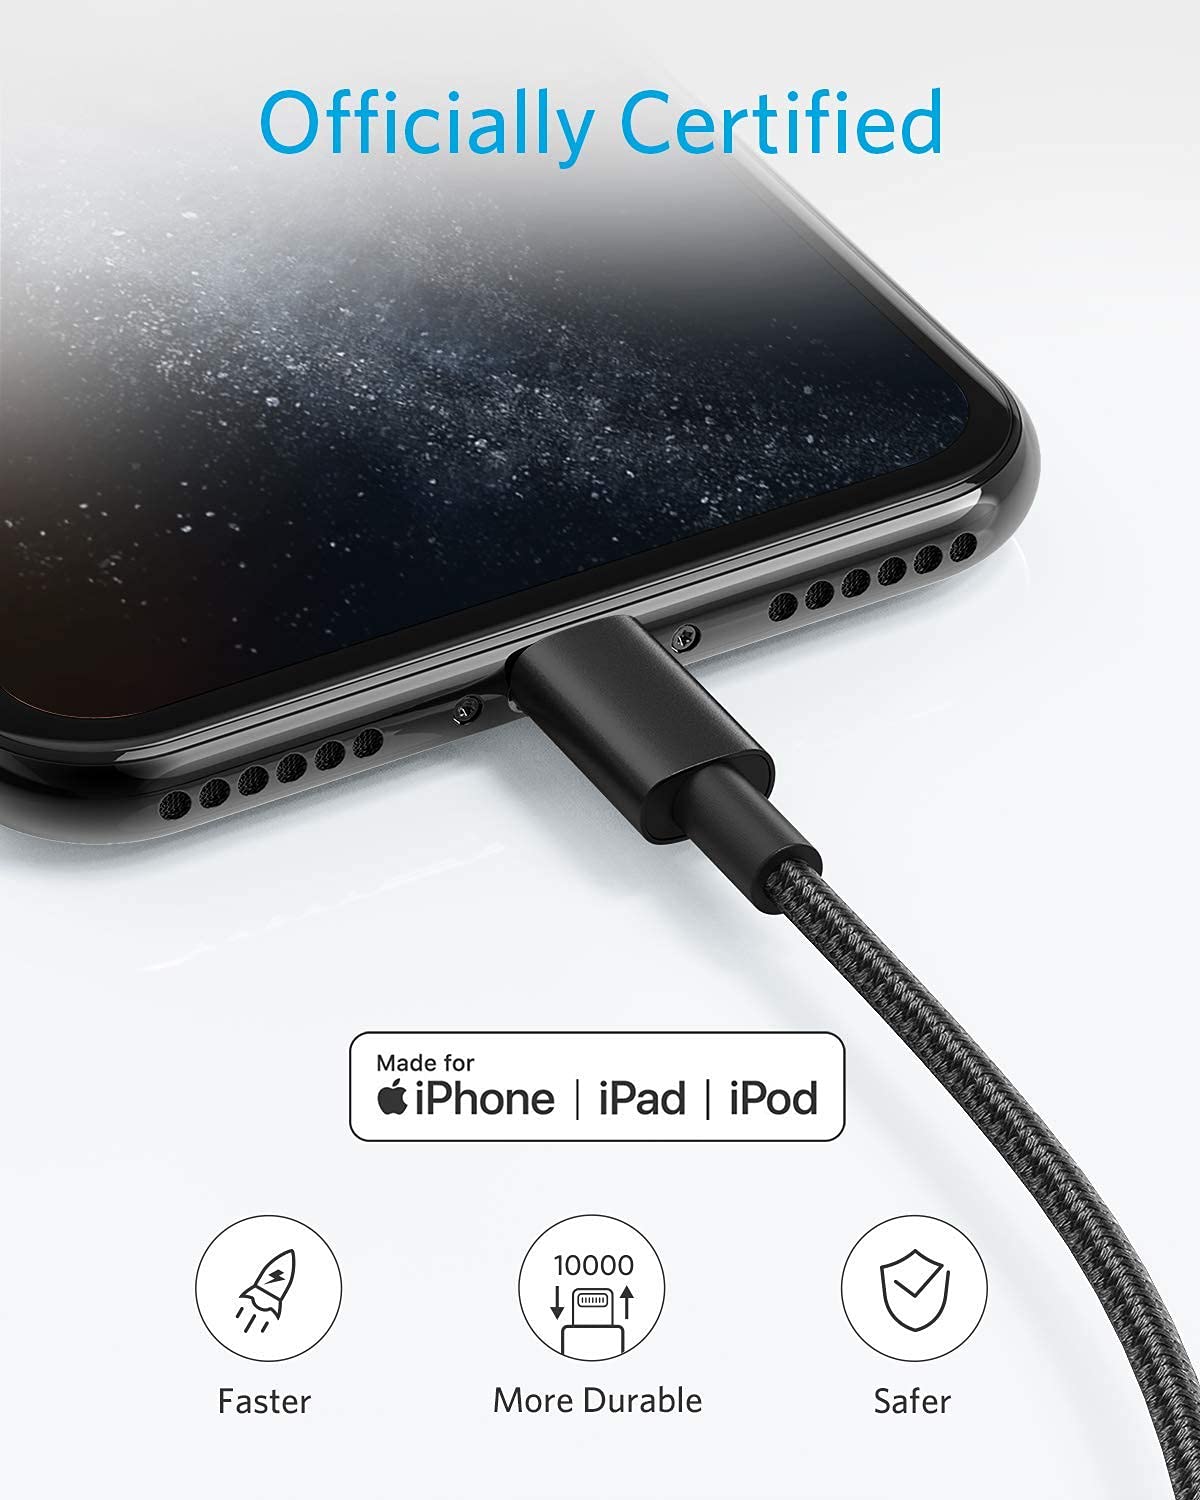 Anker 6 ft Premium Double-Braided Nylon Lightning Cable, Apple MFi Certified for iPhone Chargers, iPhone X/8/8 Plus/7/7 Plus/6/6 Plus/5s, iPad, iPad Mini, and More (Black)